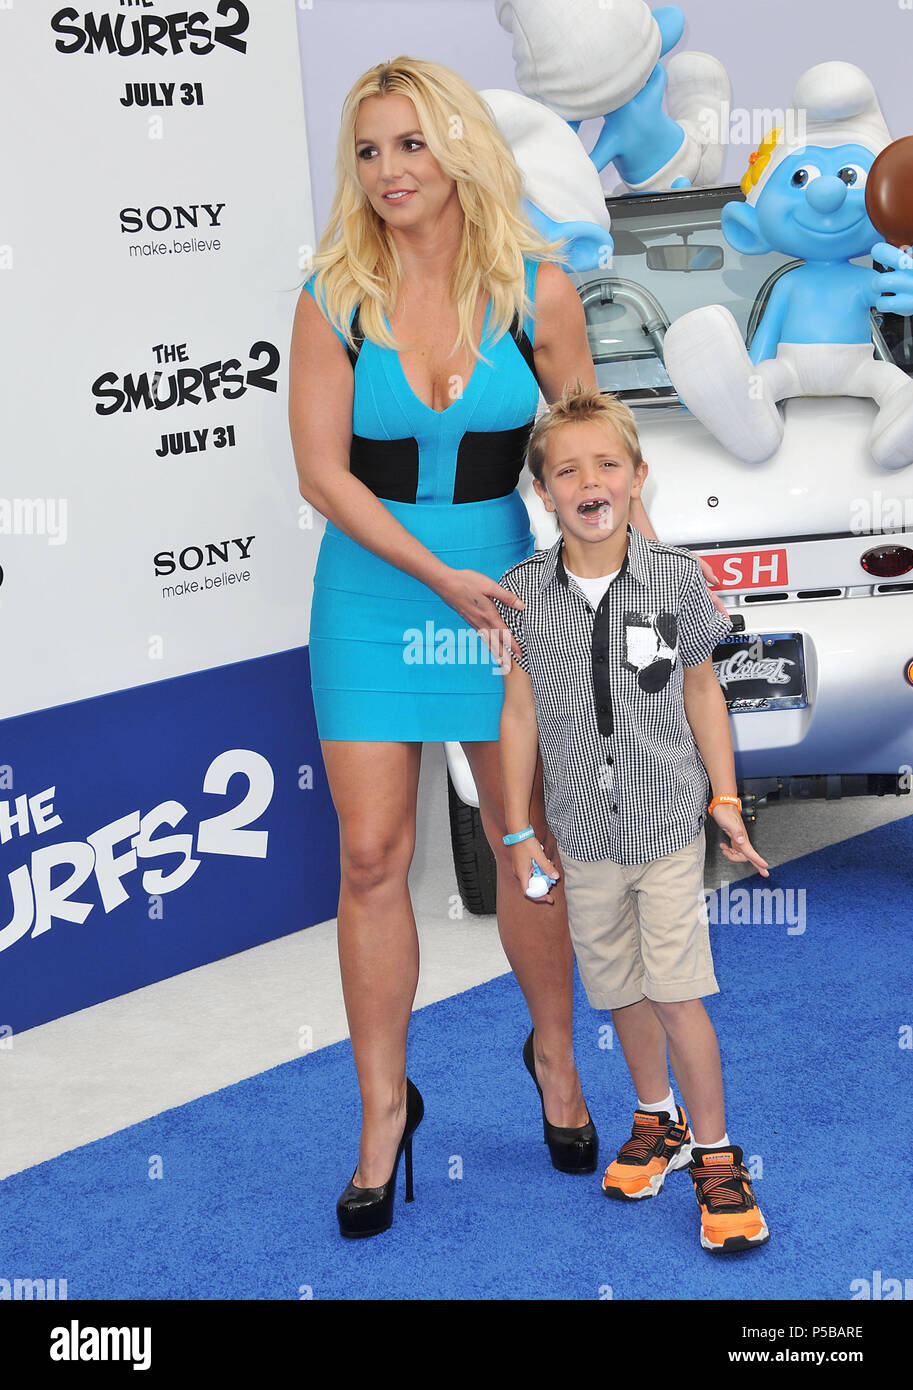 Britney Spears, Jayden James Federline at the Smurfs 2 Premiere at the Westwood Village Theatre in Los Angeles.Britney Spears, Jayden James Federline 127 ------------- Red Carpet Event, Vertical, USA, Film Industry, Celebrities,  Photography, Bestof, Arts Culture and Entertainment, Topix Celebrities fashion /  Vertical, Best of, Event in Hollywood Life - California,  Red Carpet and backstage, USA, Film Industry, Celebrities,  movie celebrities, TV celebrities, Music celebrities, Photography, Bestof, Arts Culture and Entertainment,  Topix, vertical,  family from from the year , 2013, inquiry ts Stock Photo